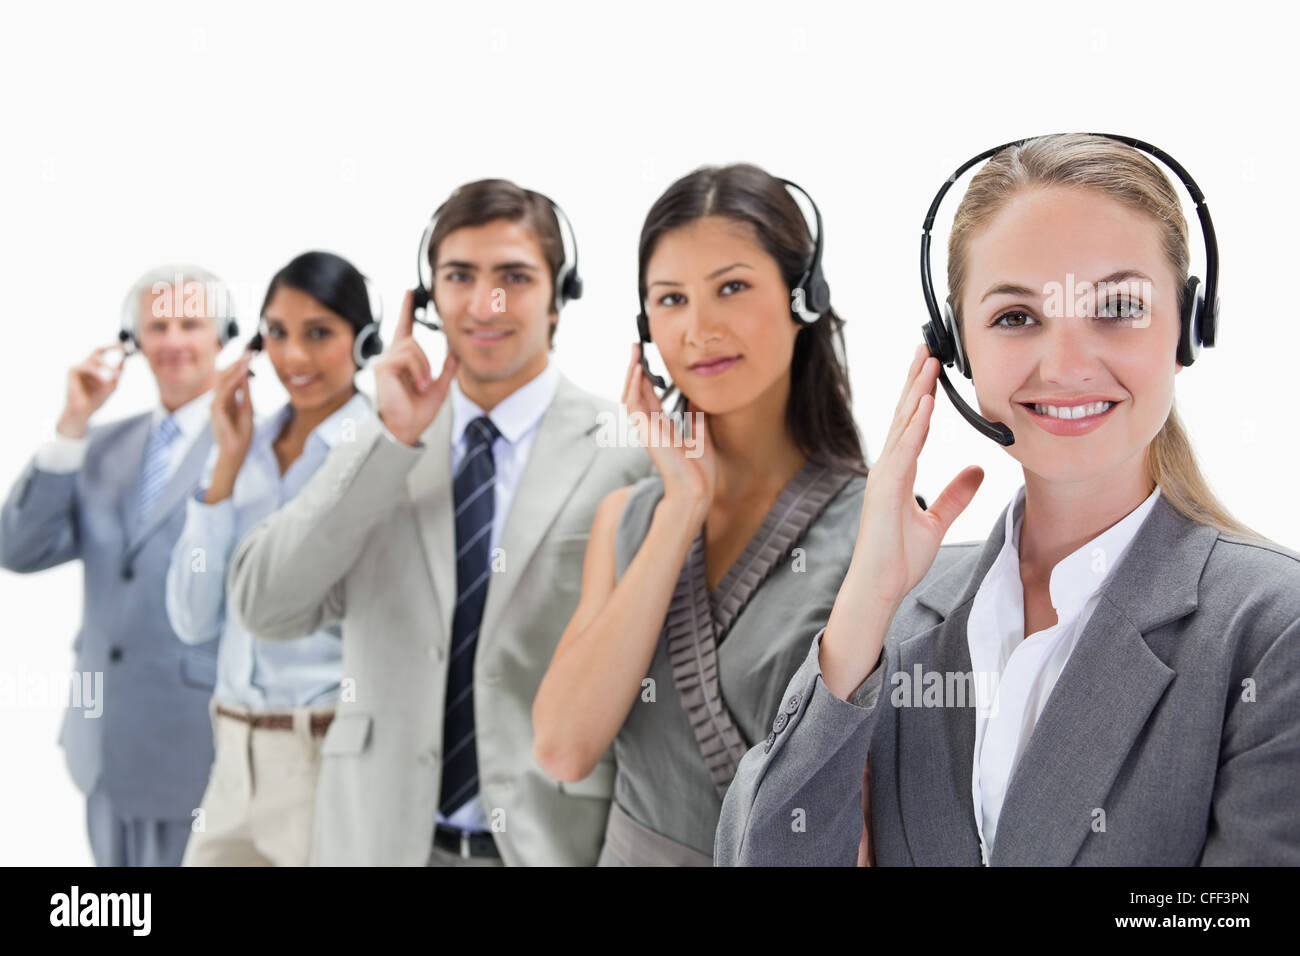 Professionals listening and smiling with headsets Stock Photo